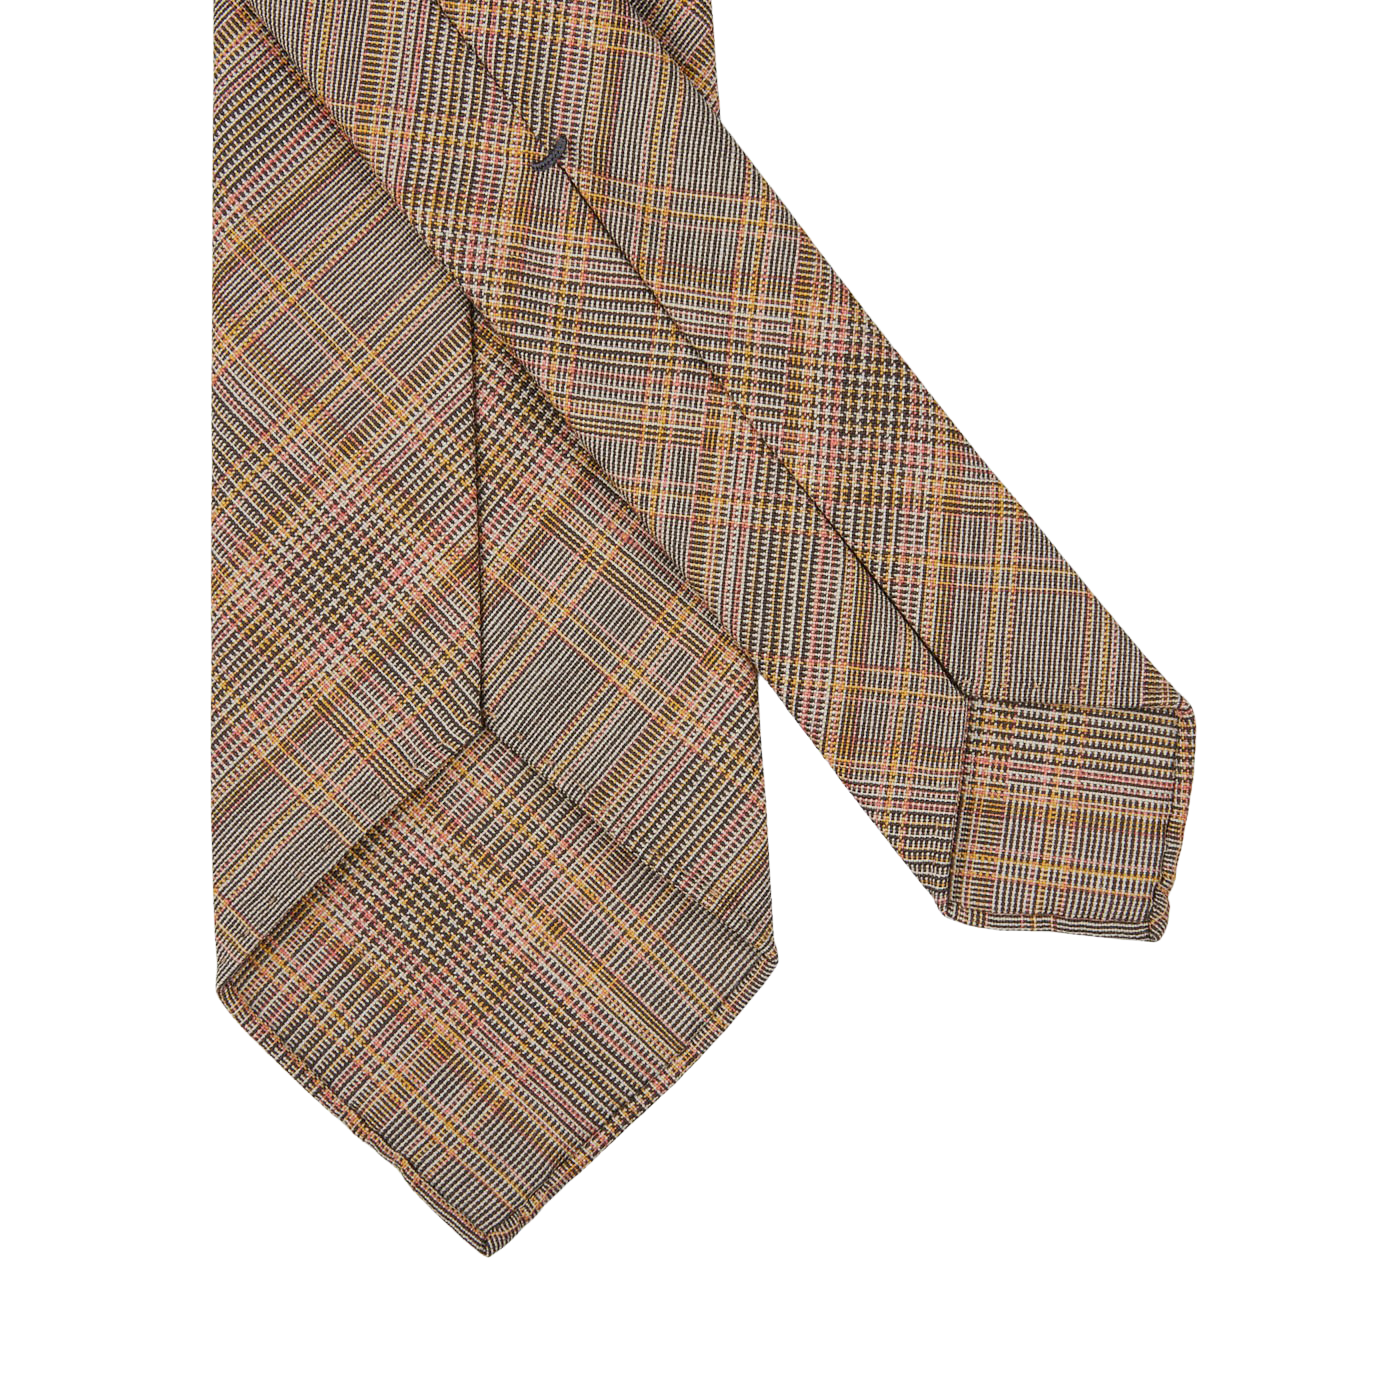 Dreaming of Monday Orange Checked 7-Fold Super 100s Wool Tie Back